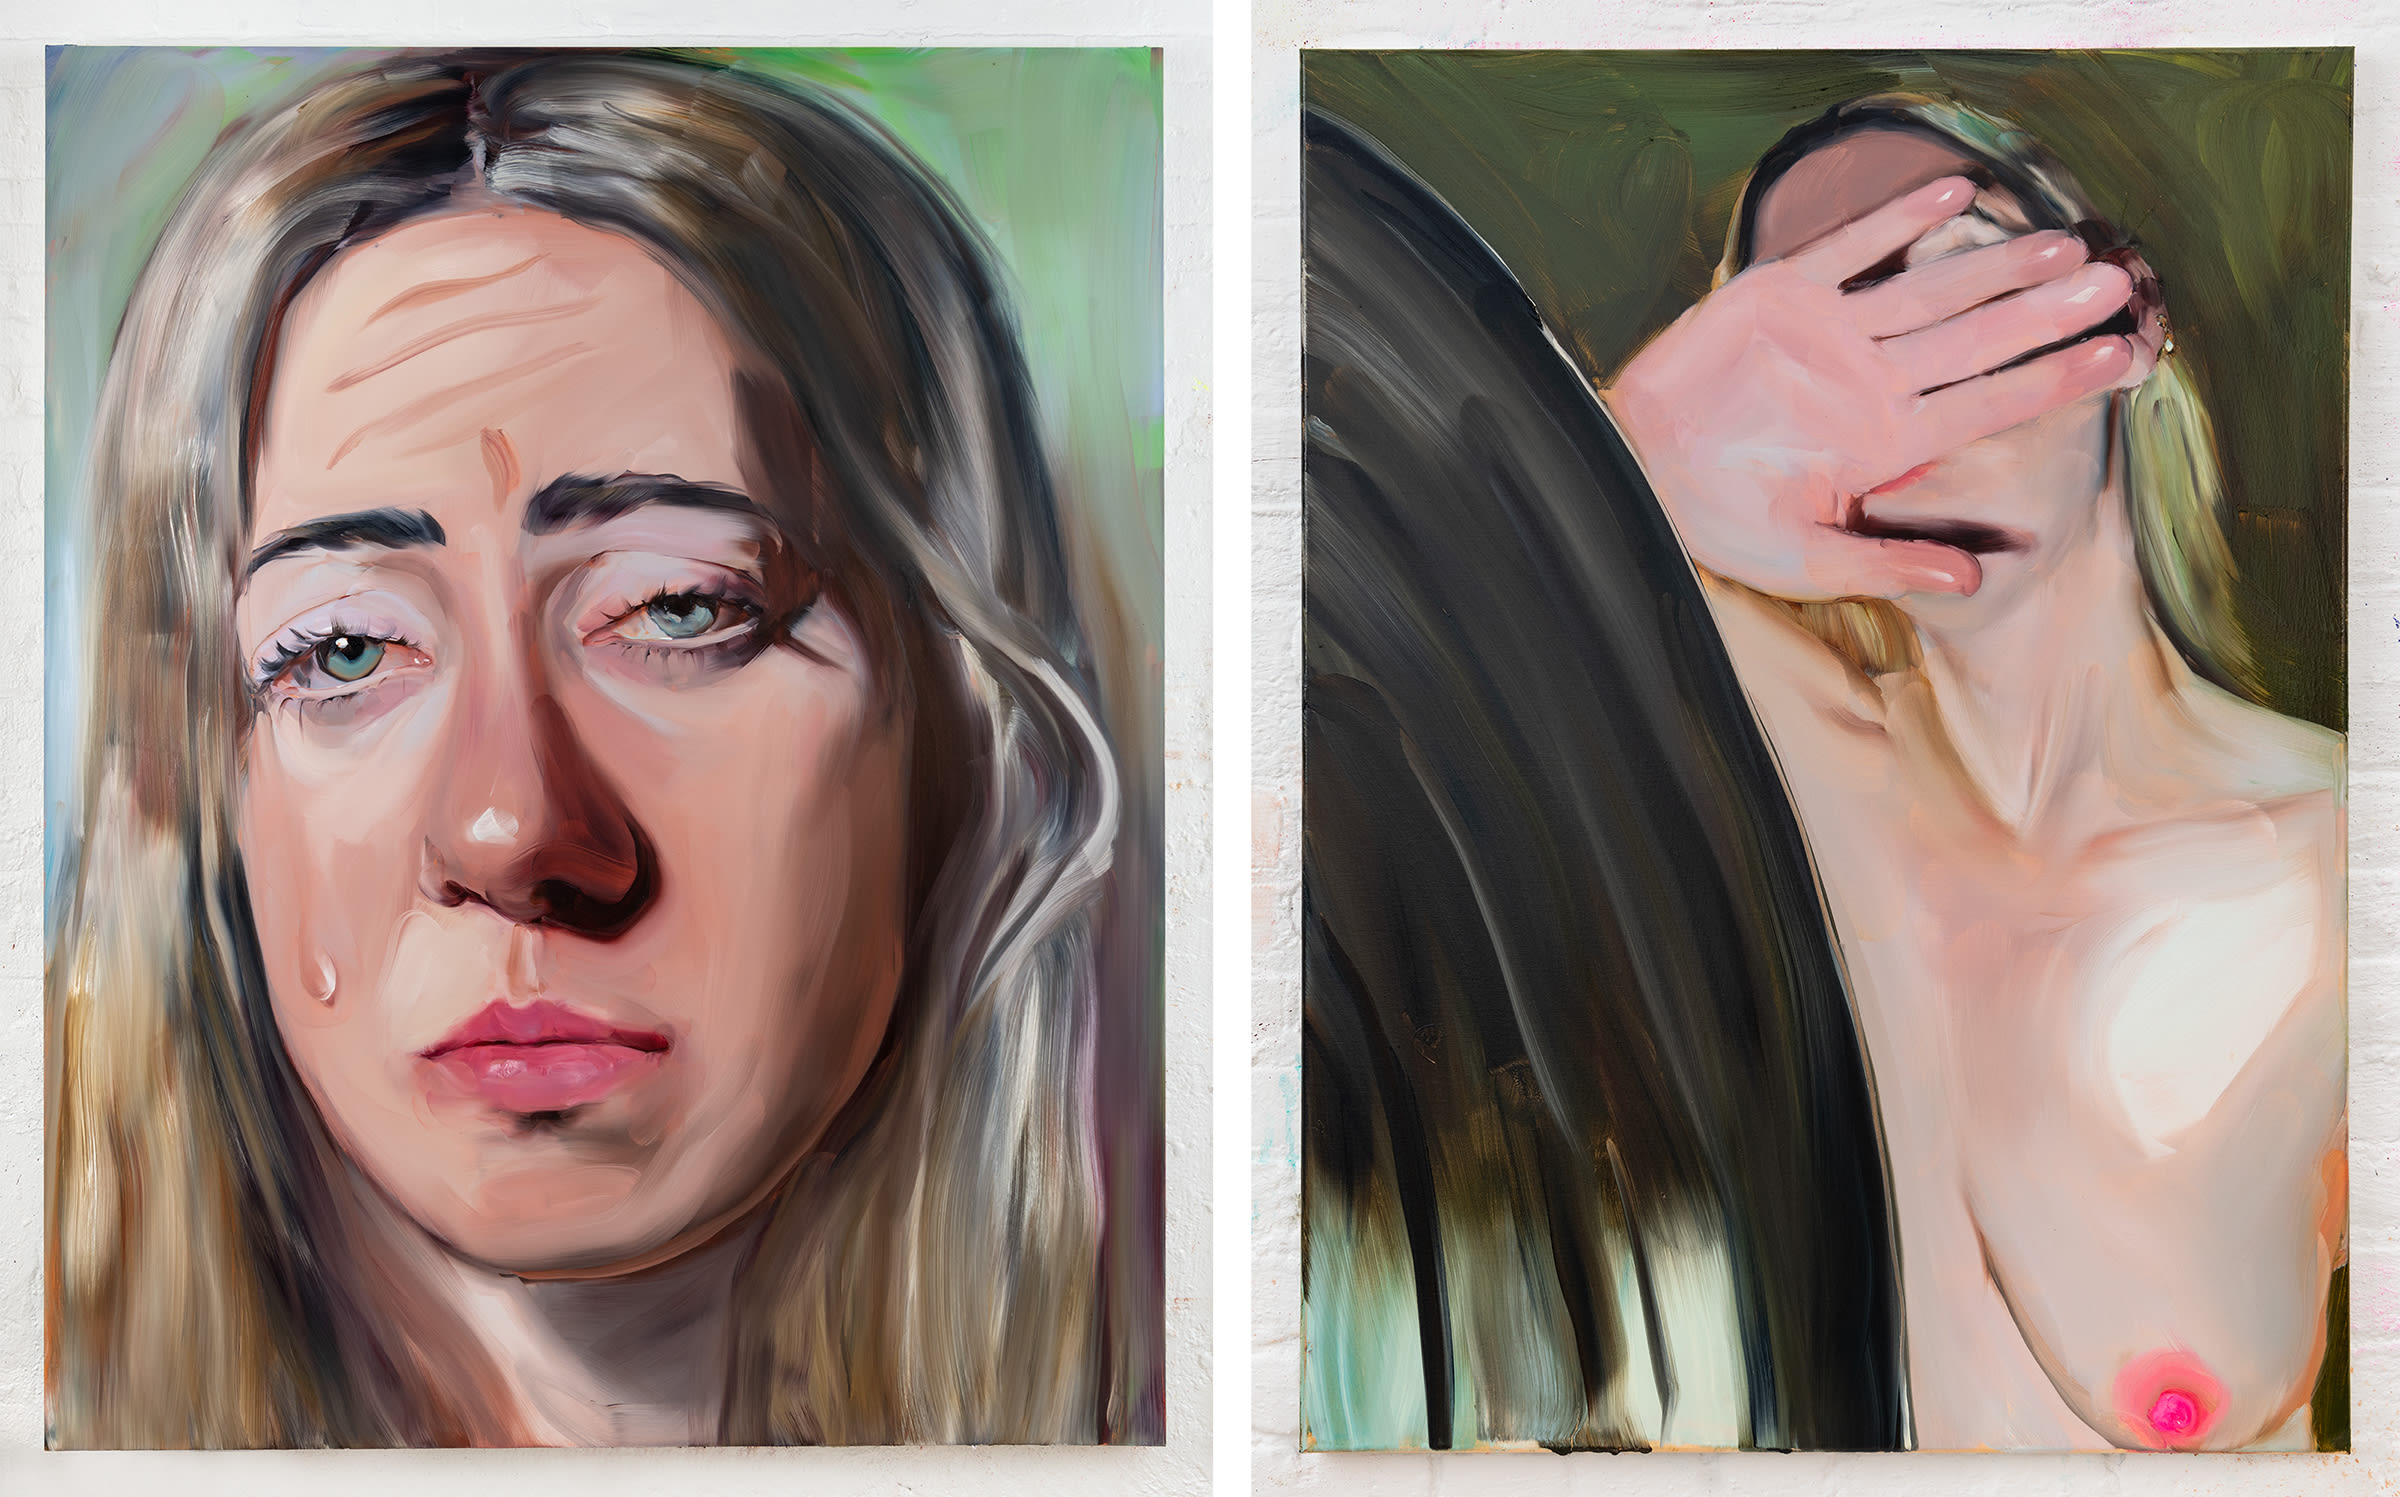 Jenna Gribbon, Fake cry (left) and M deflecting (right), 2022. Courtesy of the artist and Massimo De Carlo.